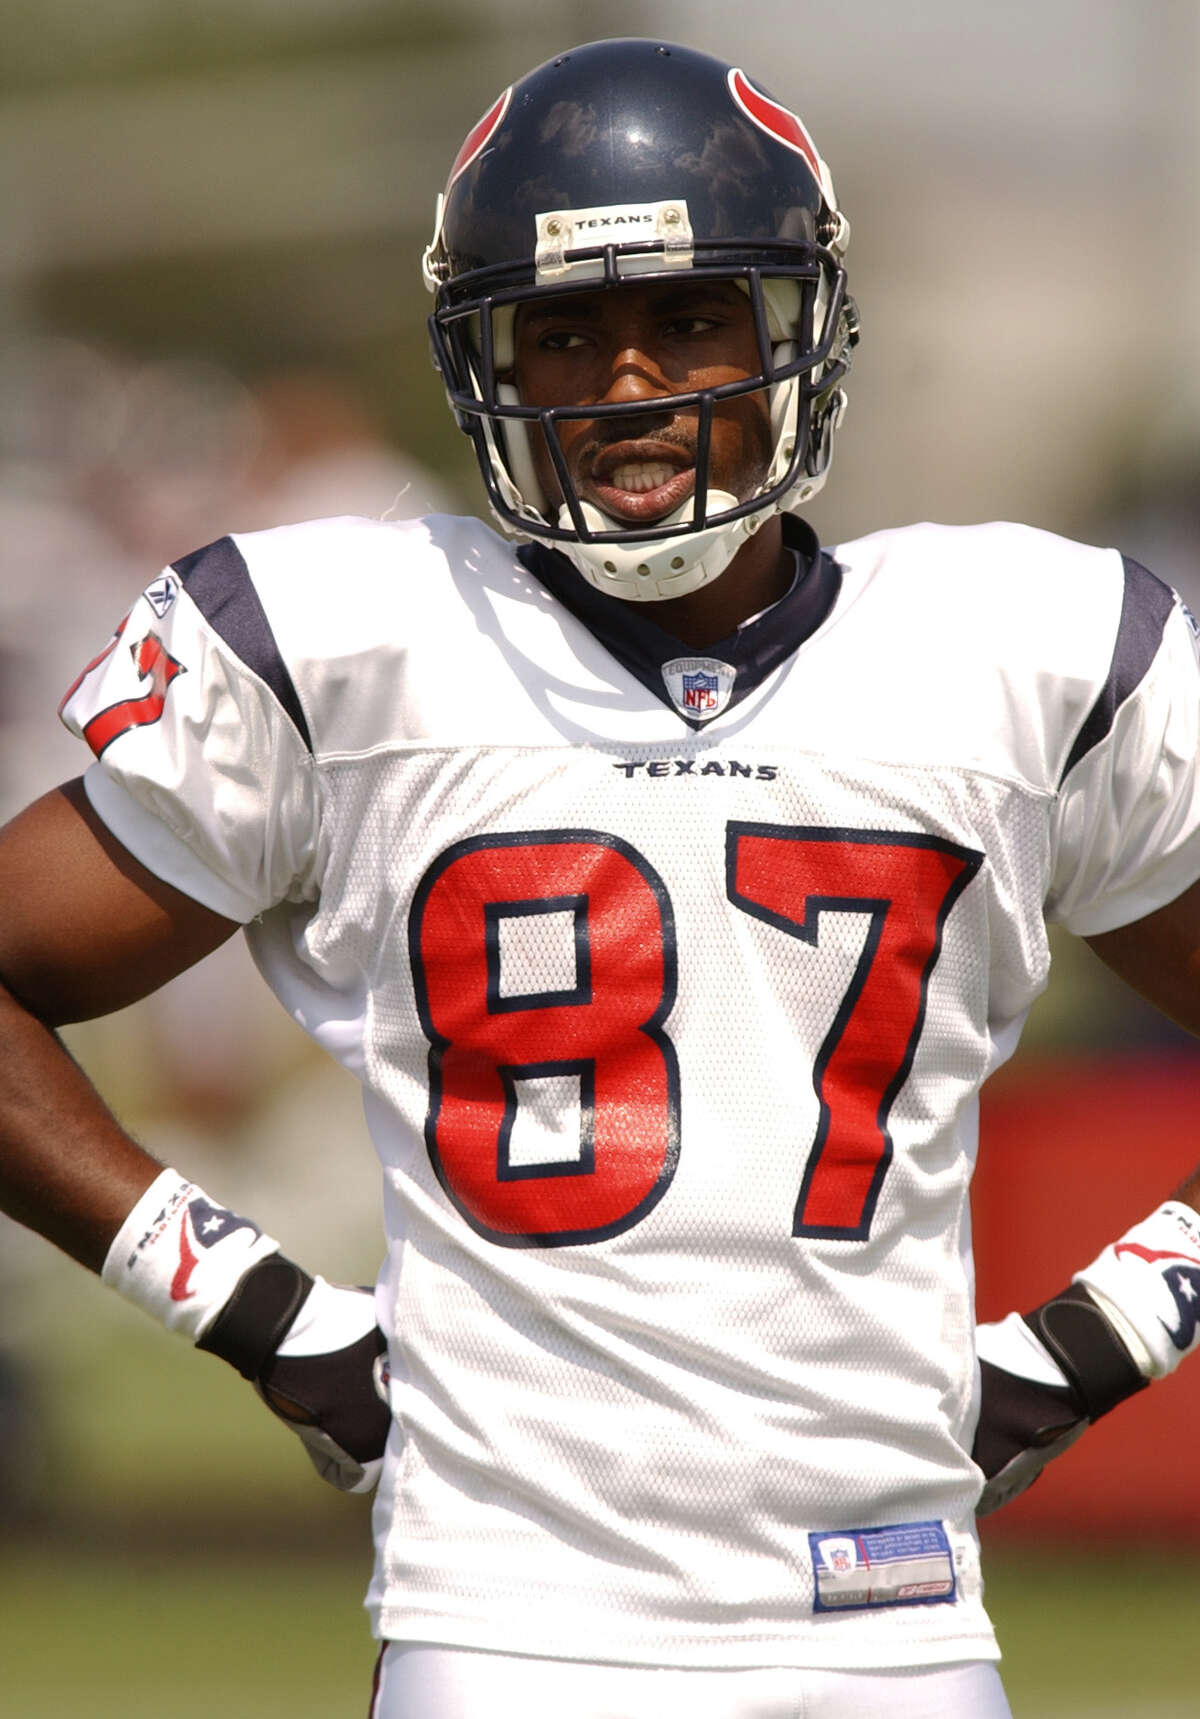 Texans wide receivers JaJuan Dawson (87), during training camp Tuesday, August 12, 2003 in Houston. CHRISTOBAL PEREZ/HOUSTON CHRONICLE